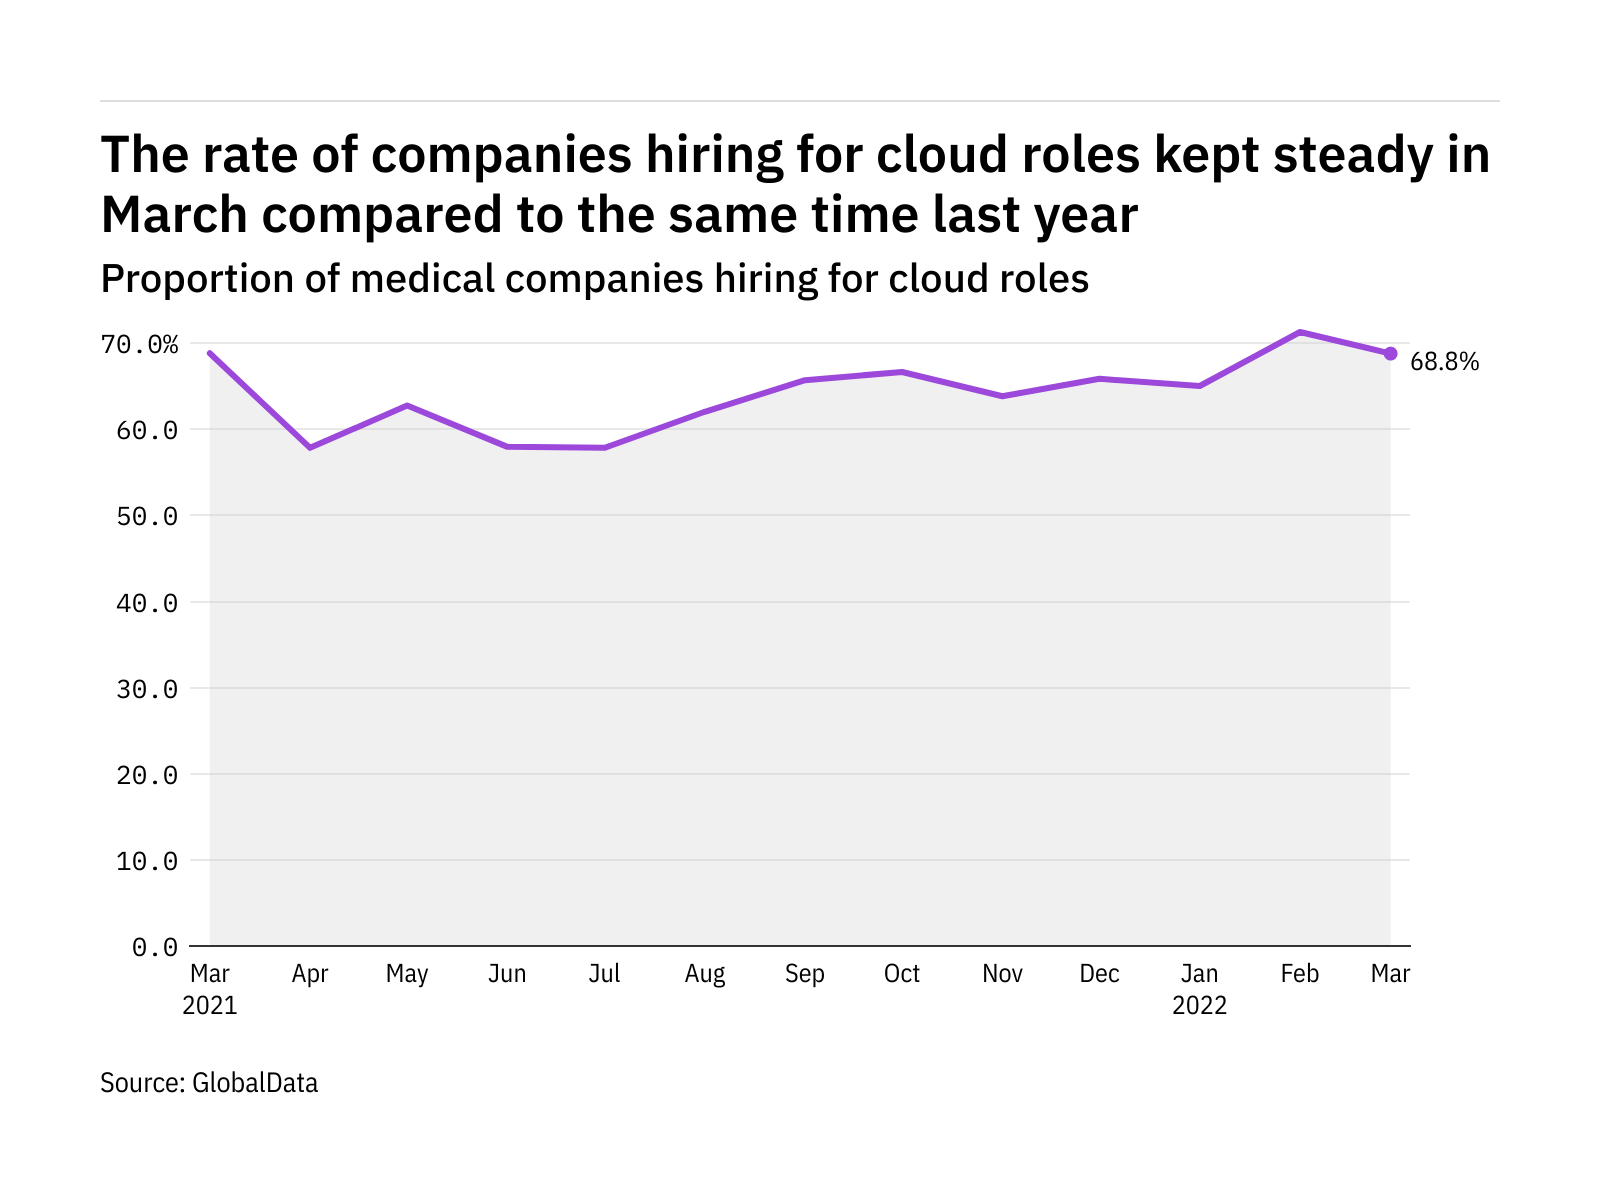 Cloud hiring levels in the medical industry kept steady in March 2022